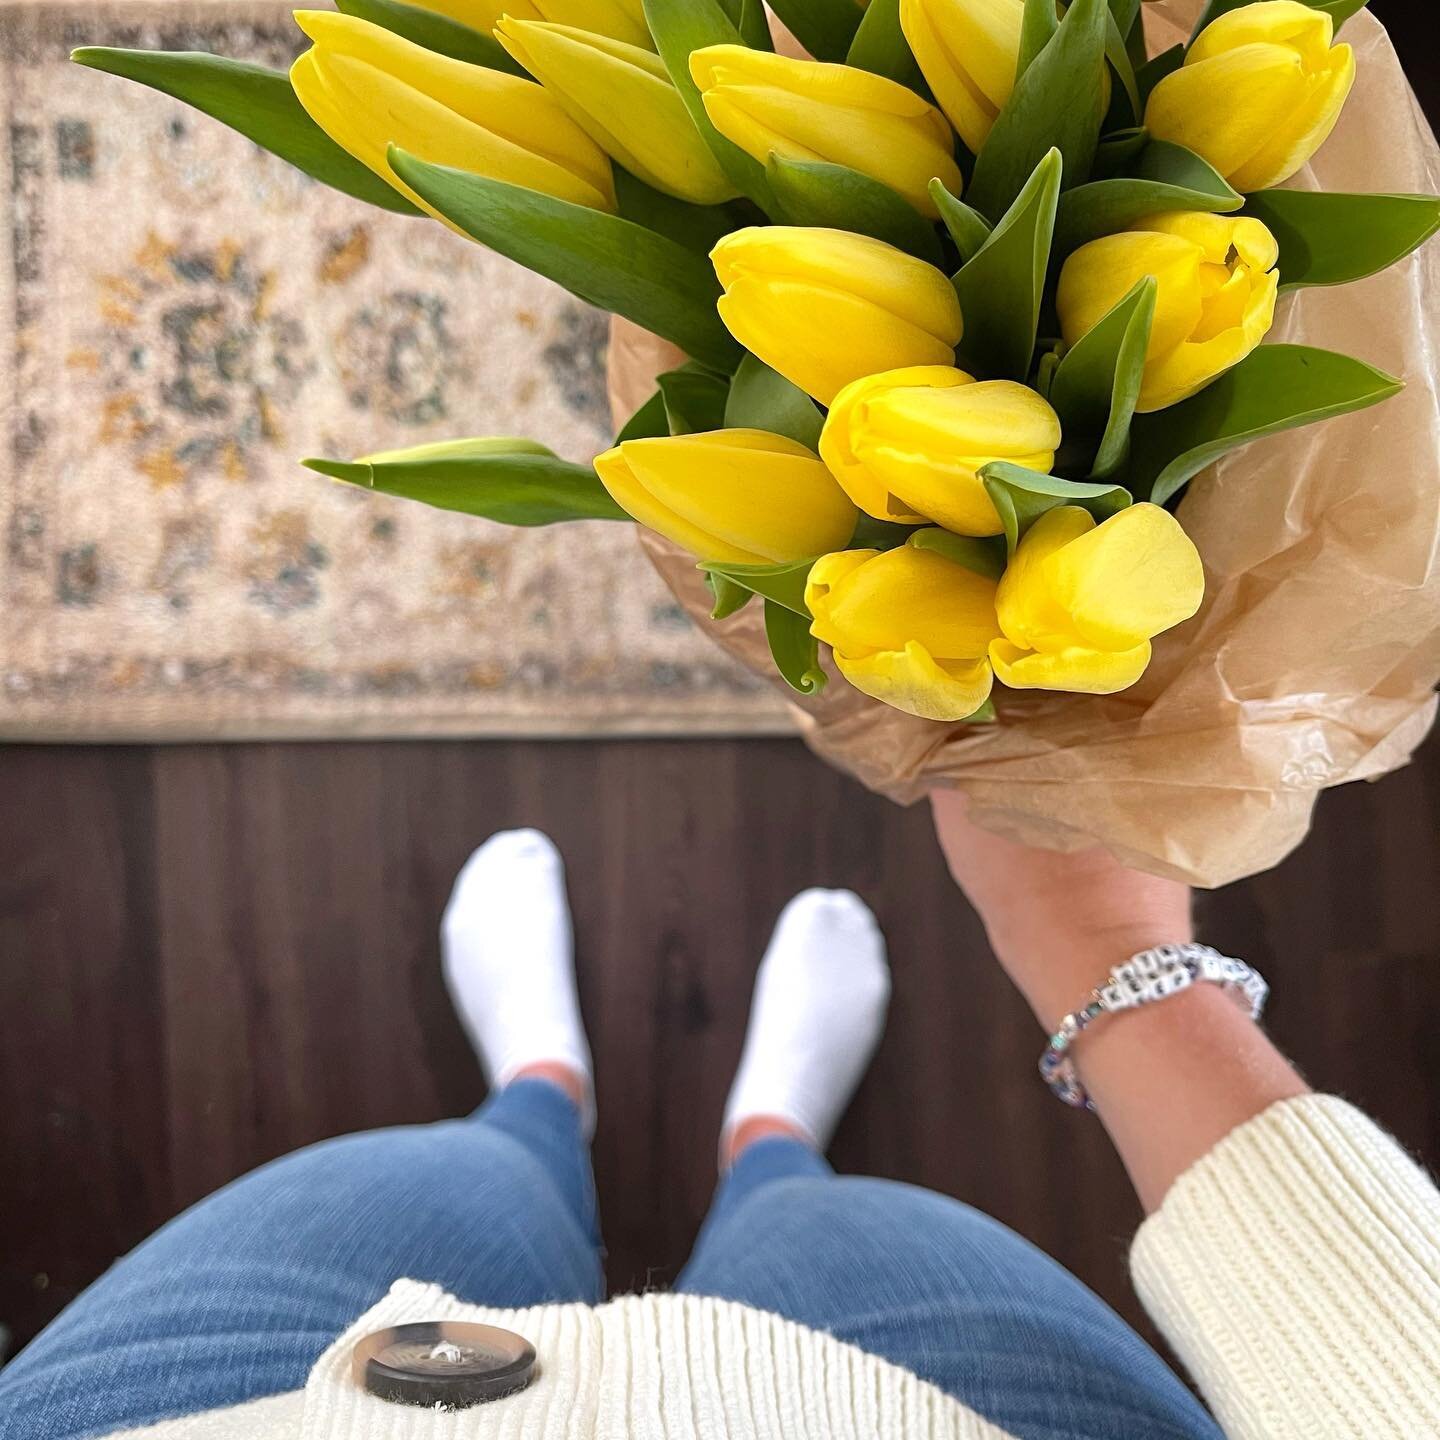 Hi friends, I hope your Saturday is as bright and happy as these fresh tulips 💛